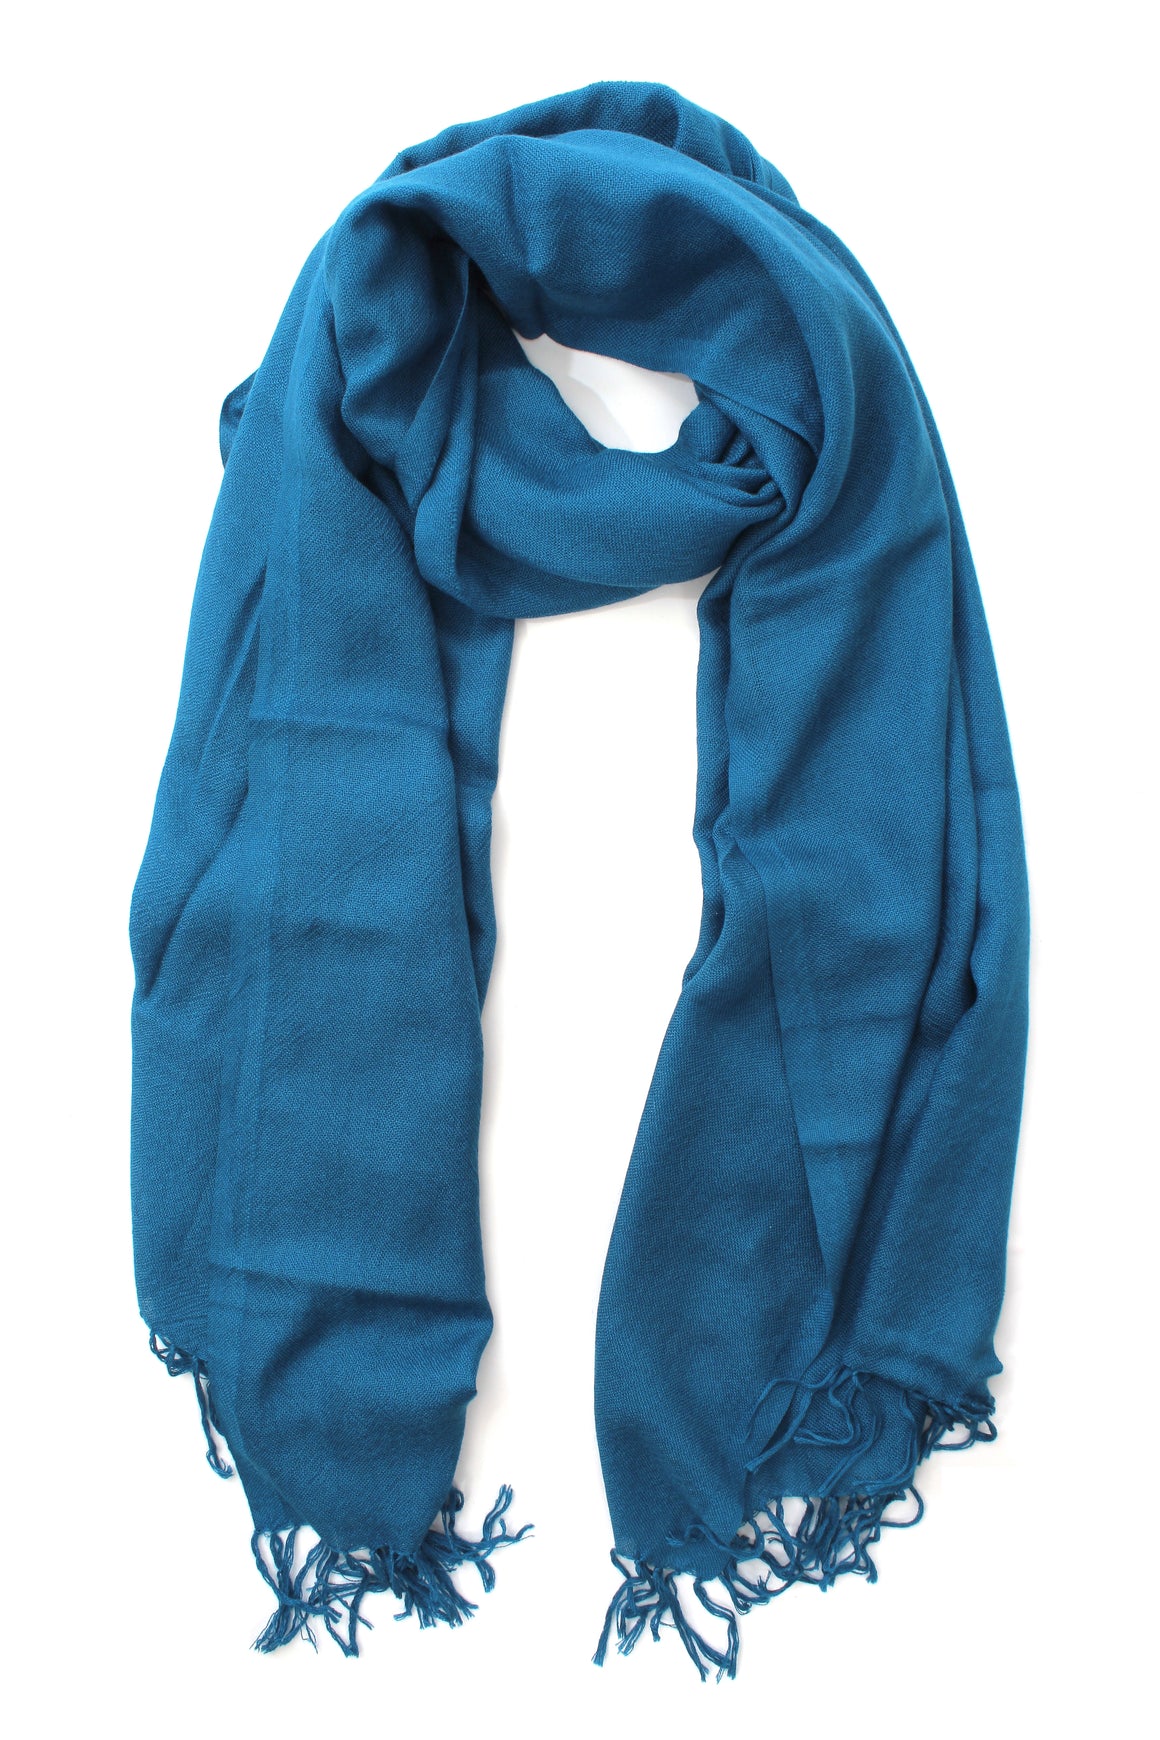 Loro Piana Fringed Cashmere and Silk-Blend Scarf